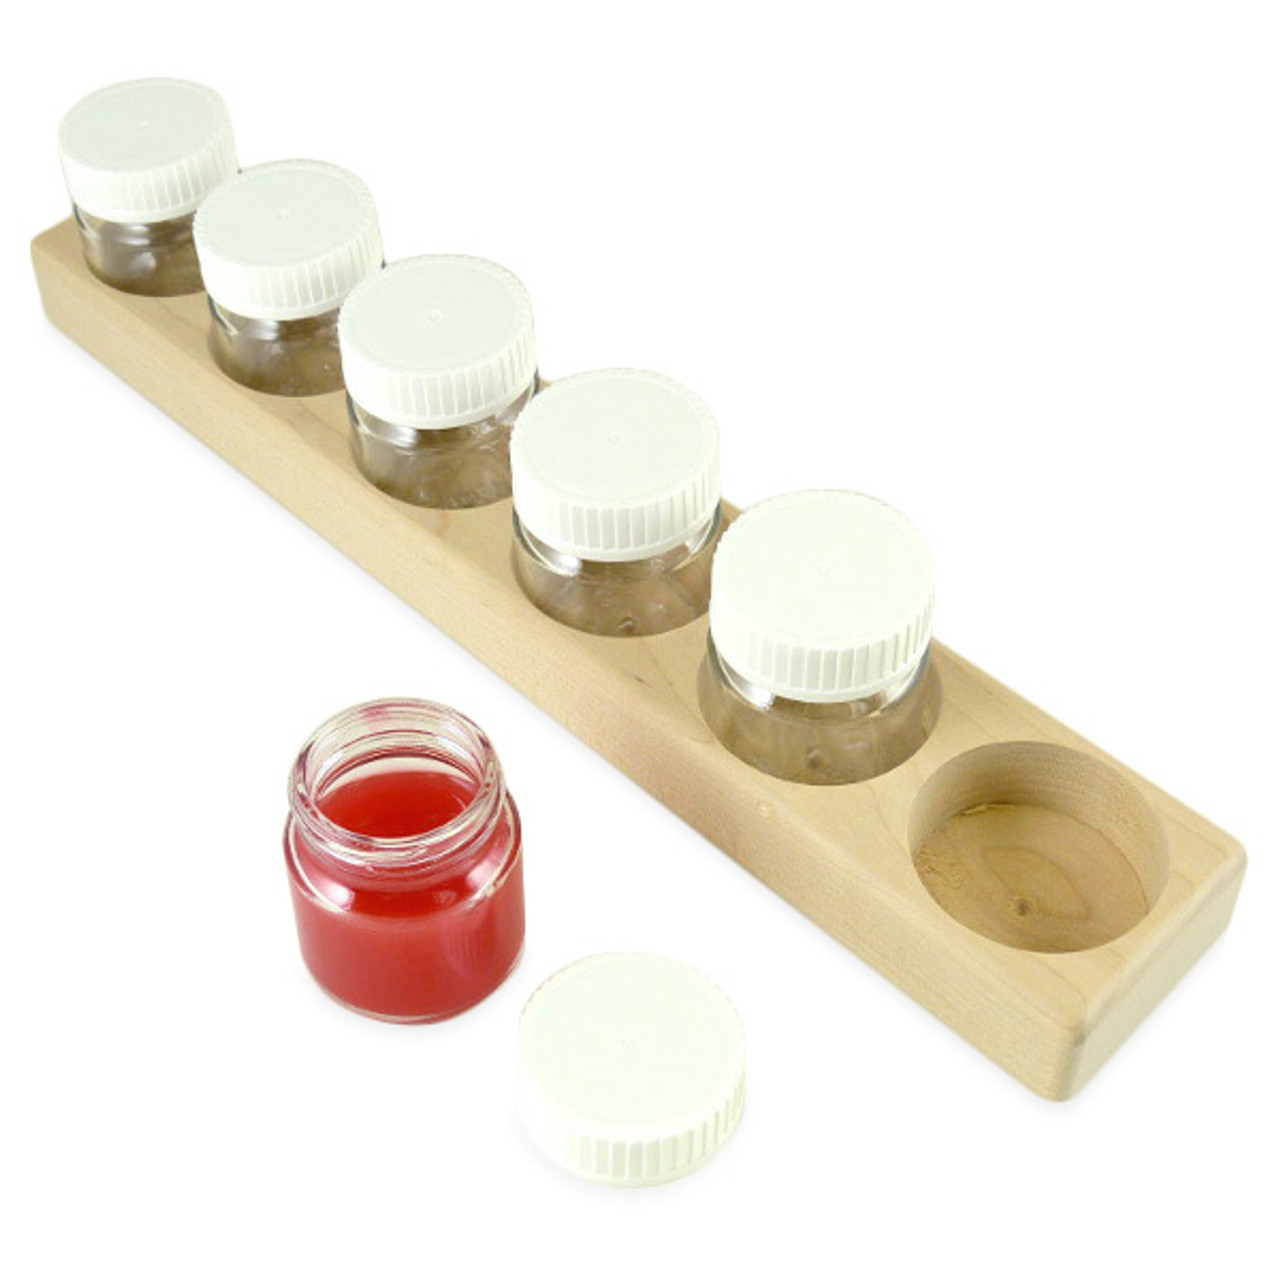 cherry wooden toys paint jar holder USA made